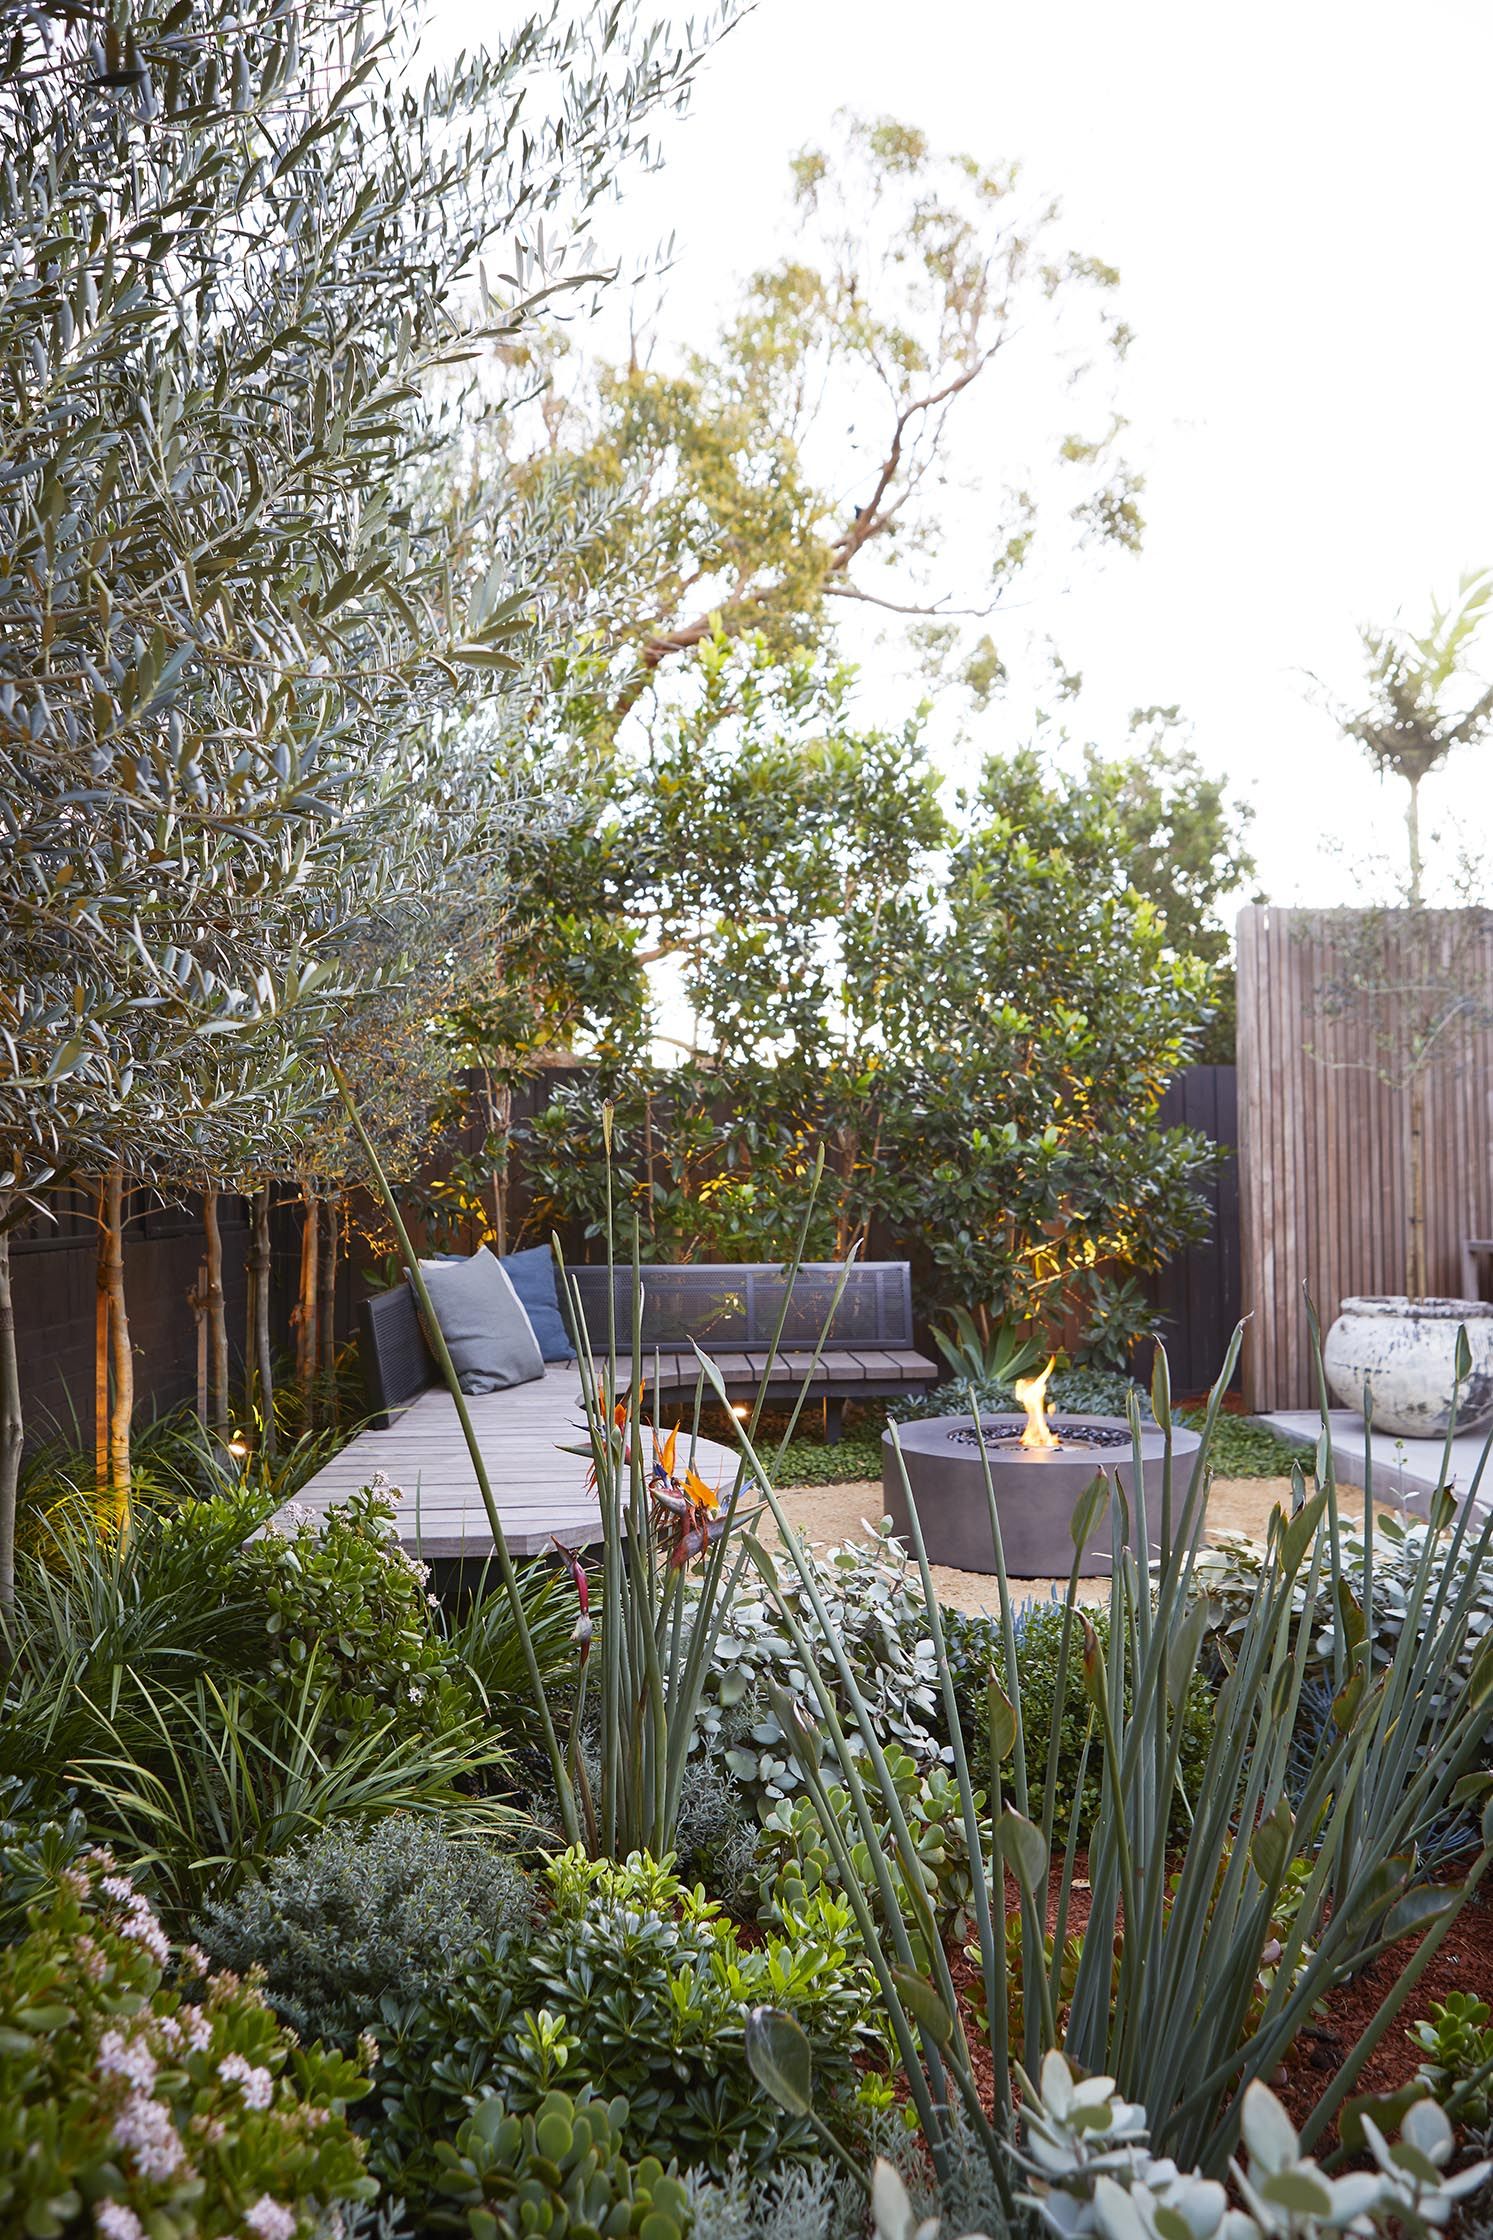 Creating a Beautiful Garden Landscape for Your Home